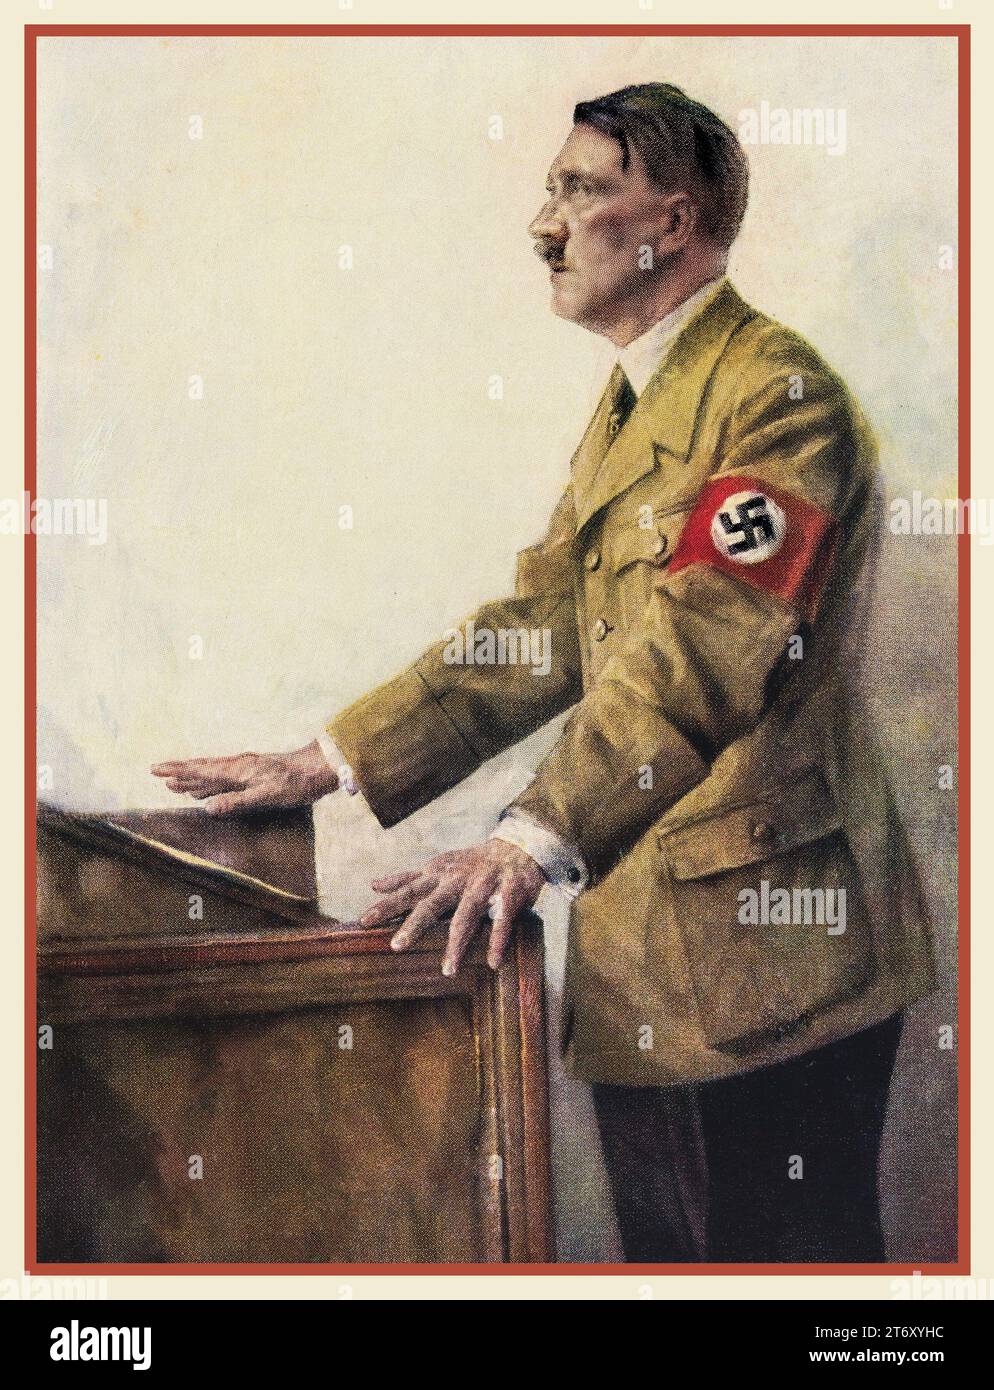 1930s Adolf Hitler 'The Fuhrer' in military uniform wearing a swastika armband, standing at a podium making a speech. Colour  illustration by H J Mann. Hitler was The Fuhrer and leader of the Nazi Party. Nazi Germany. Hoffman colour lithograph. 1938 Stock Photo